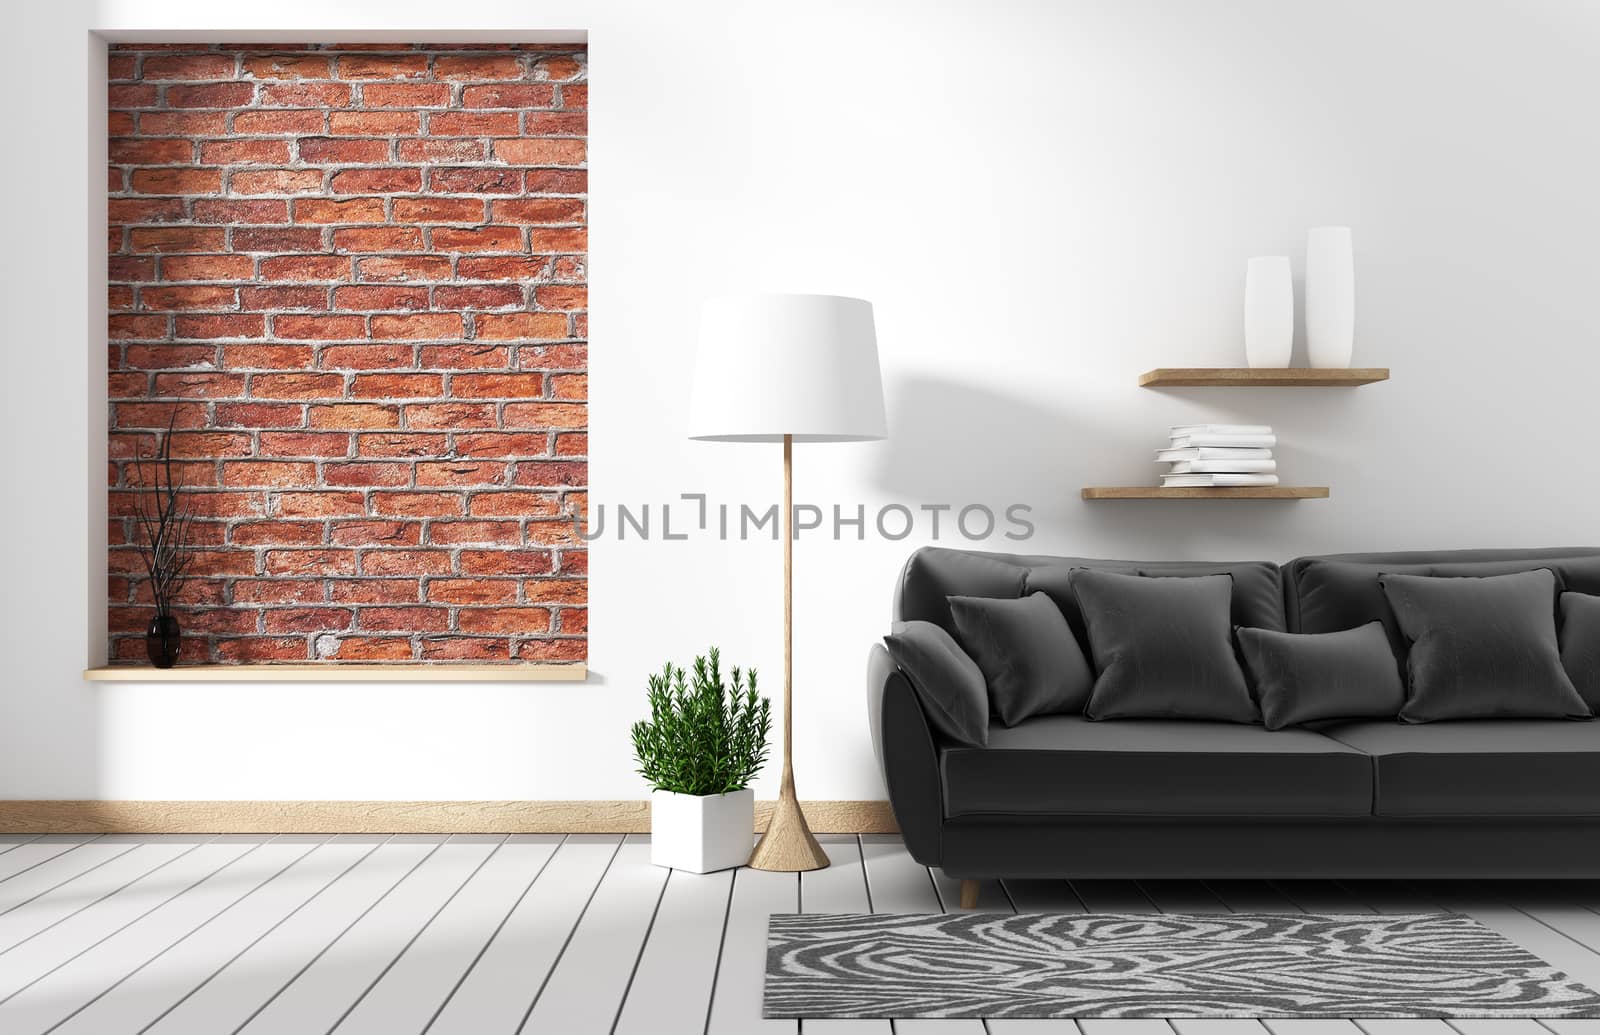 living room loft interior with sofa and Wall pattern brick in white wall. 3d rendering